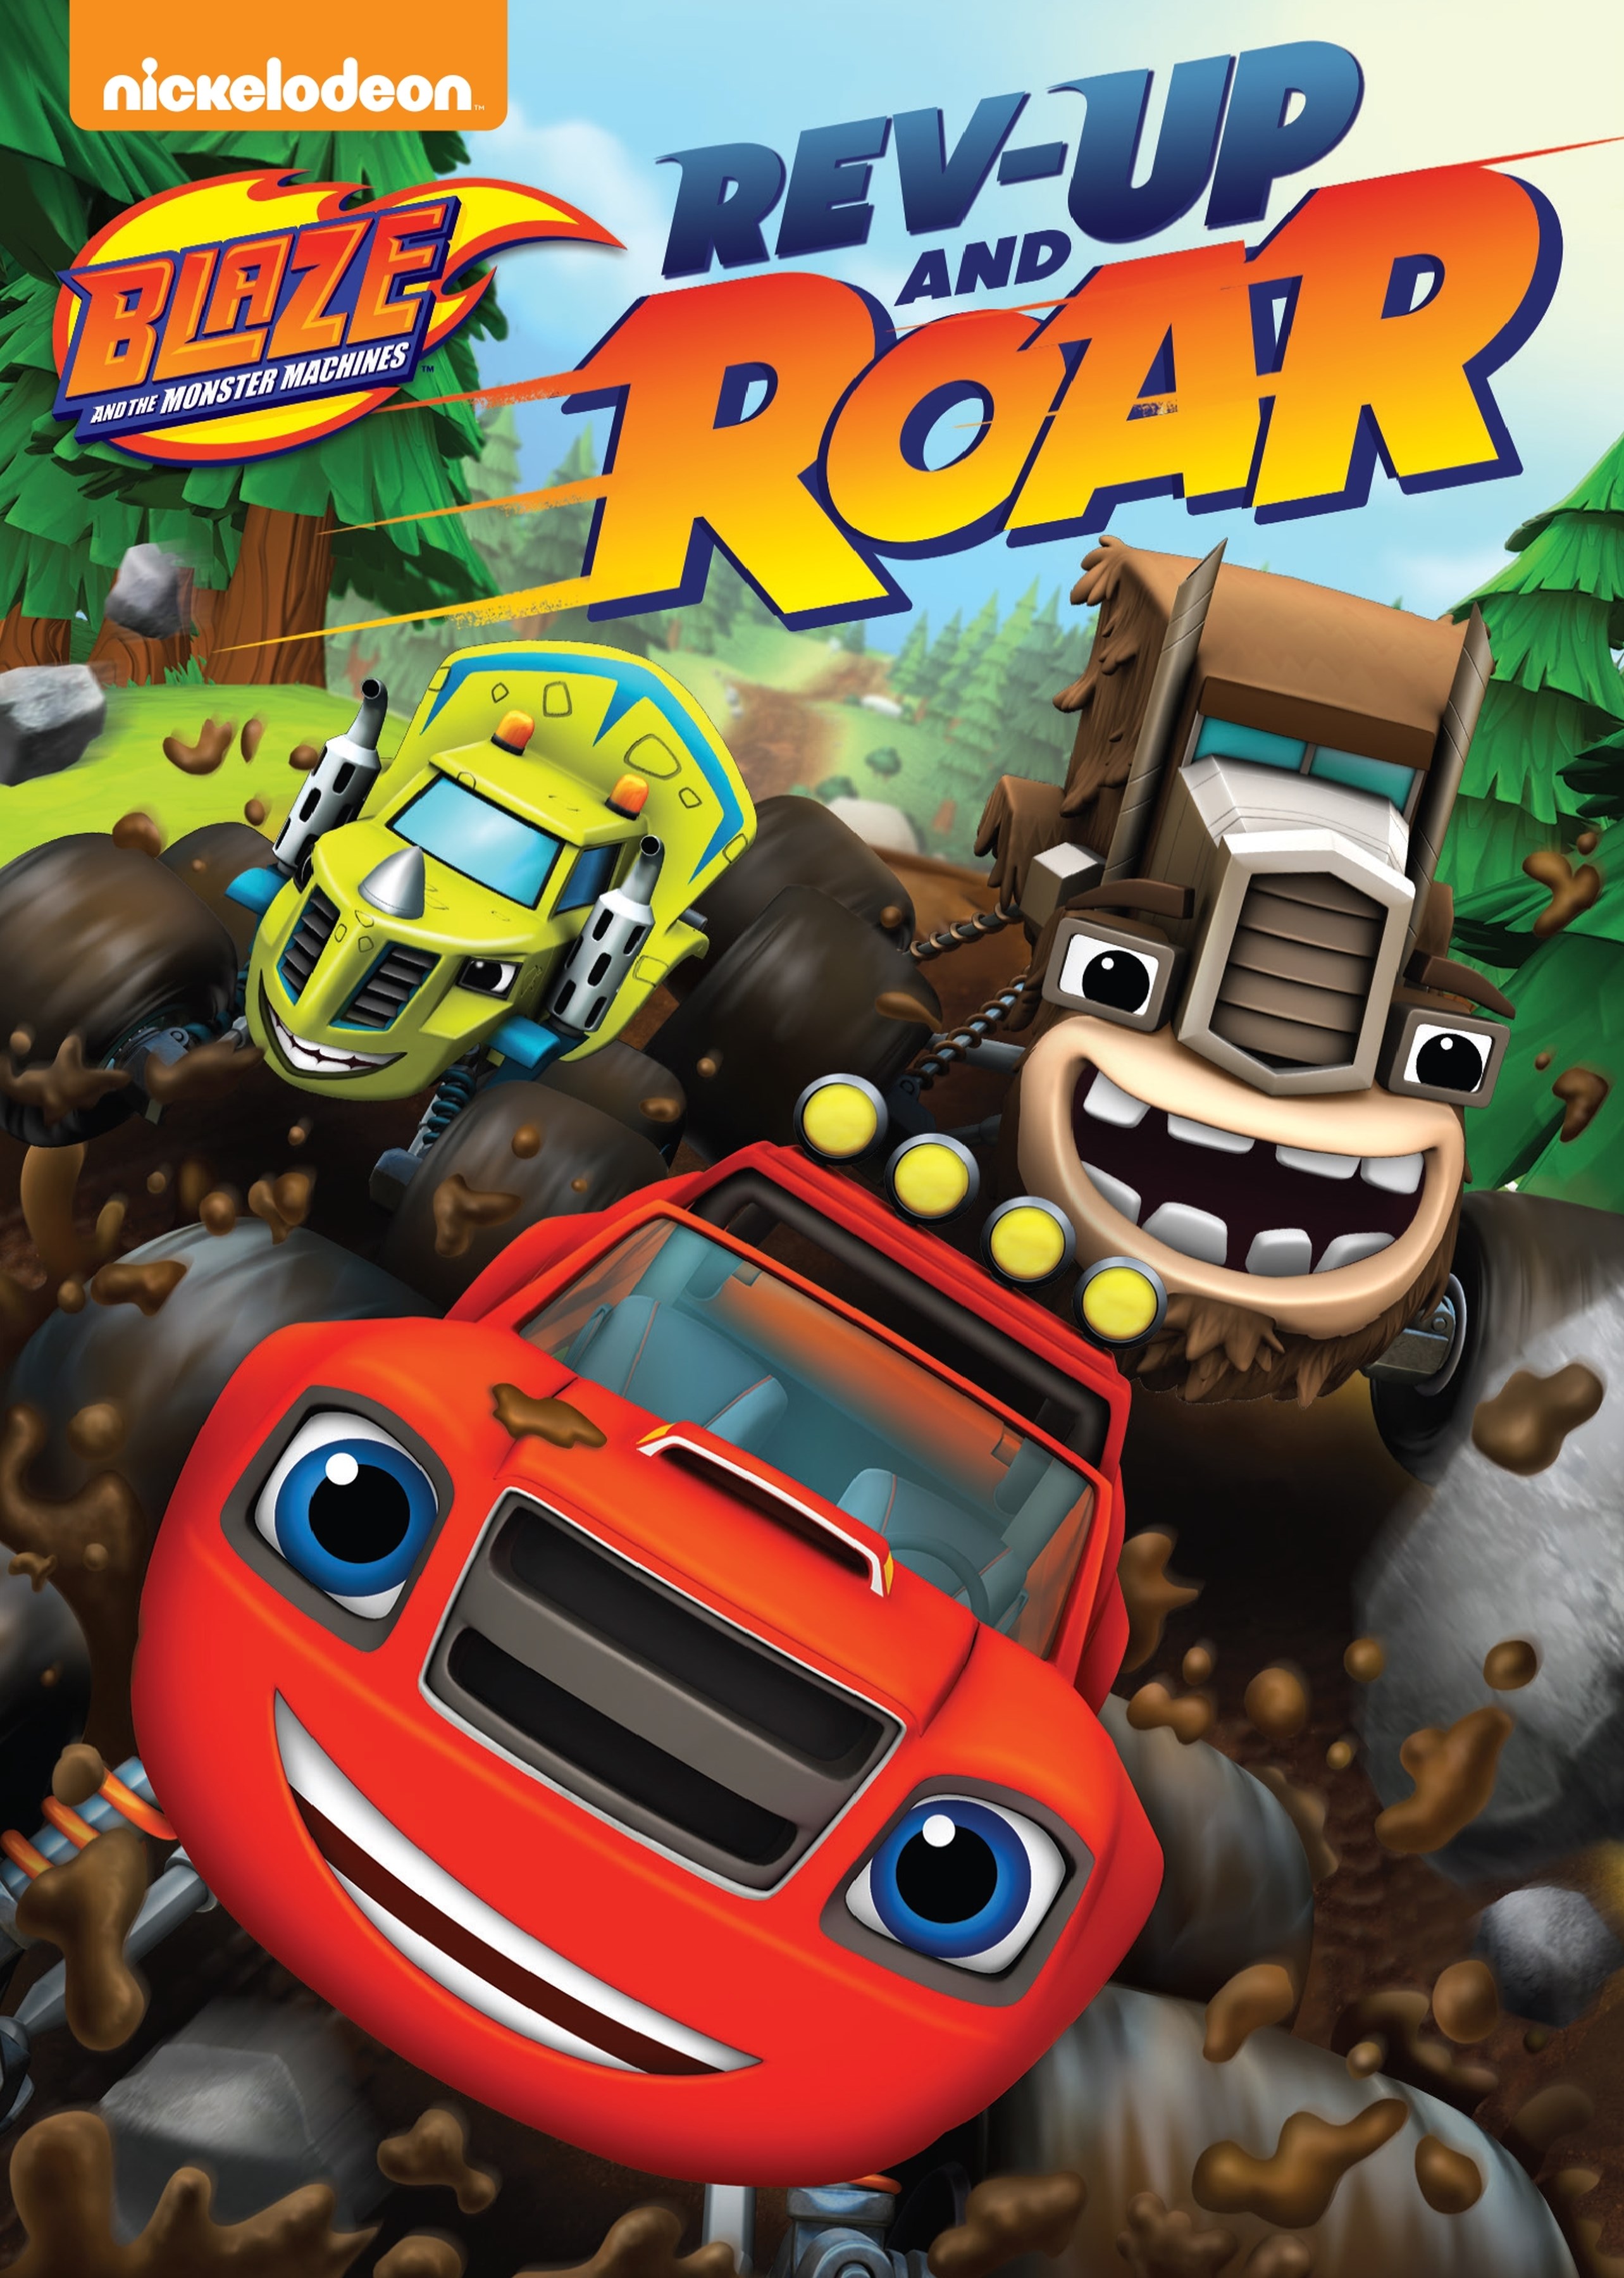 Blaze and the Monster Machines: Double Poster - Officially